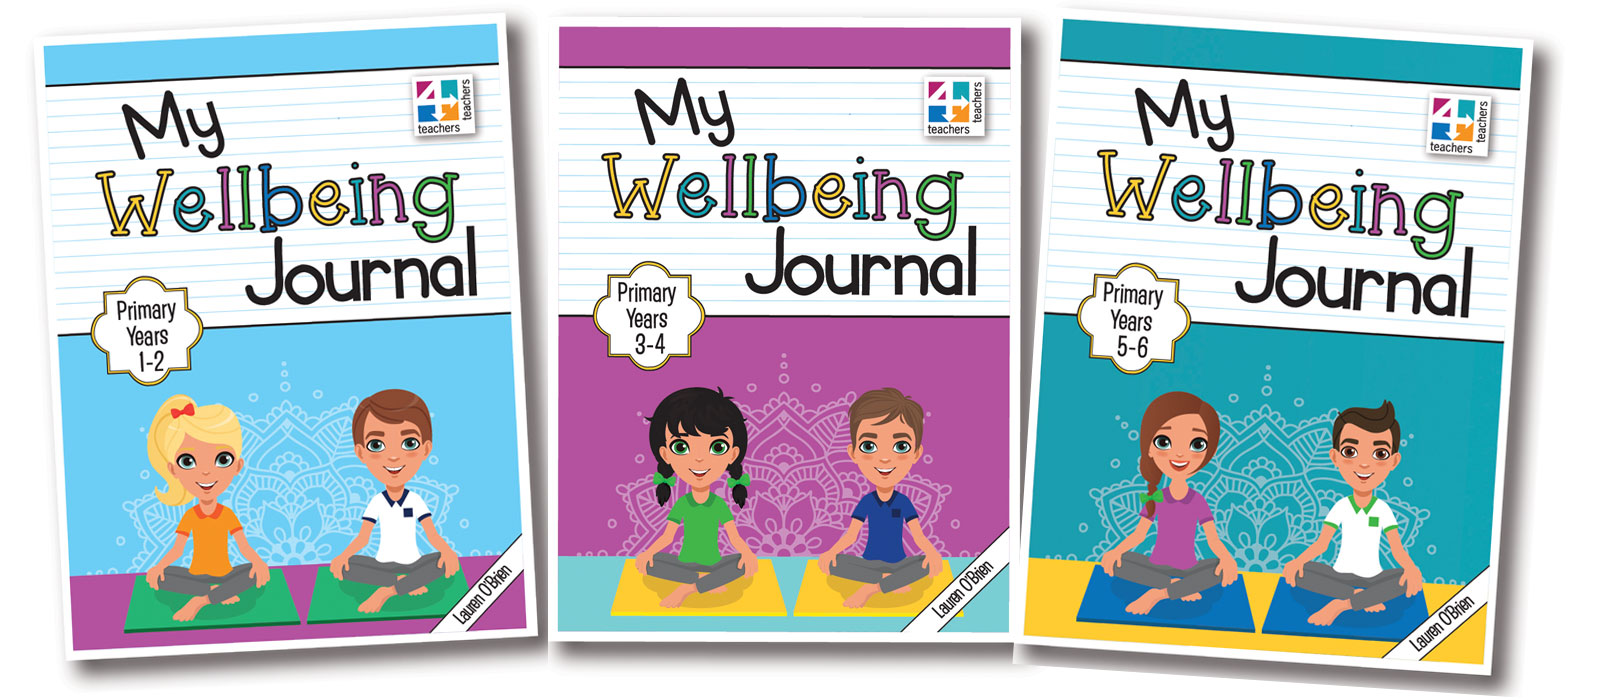 Journals for Kids - Unique Kids Writing Journals for Primary Years